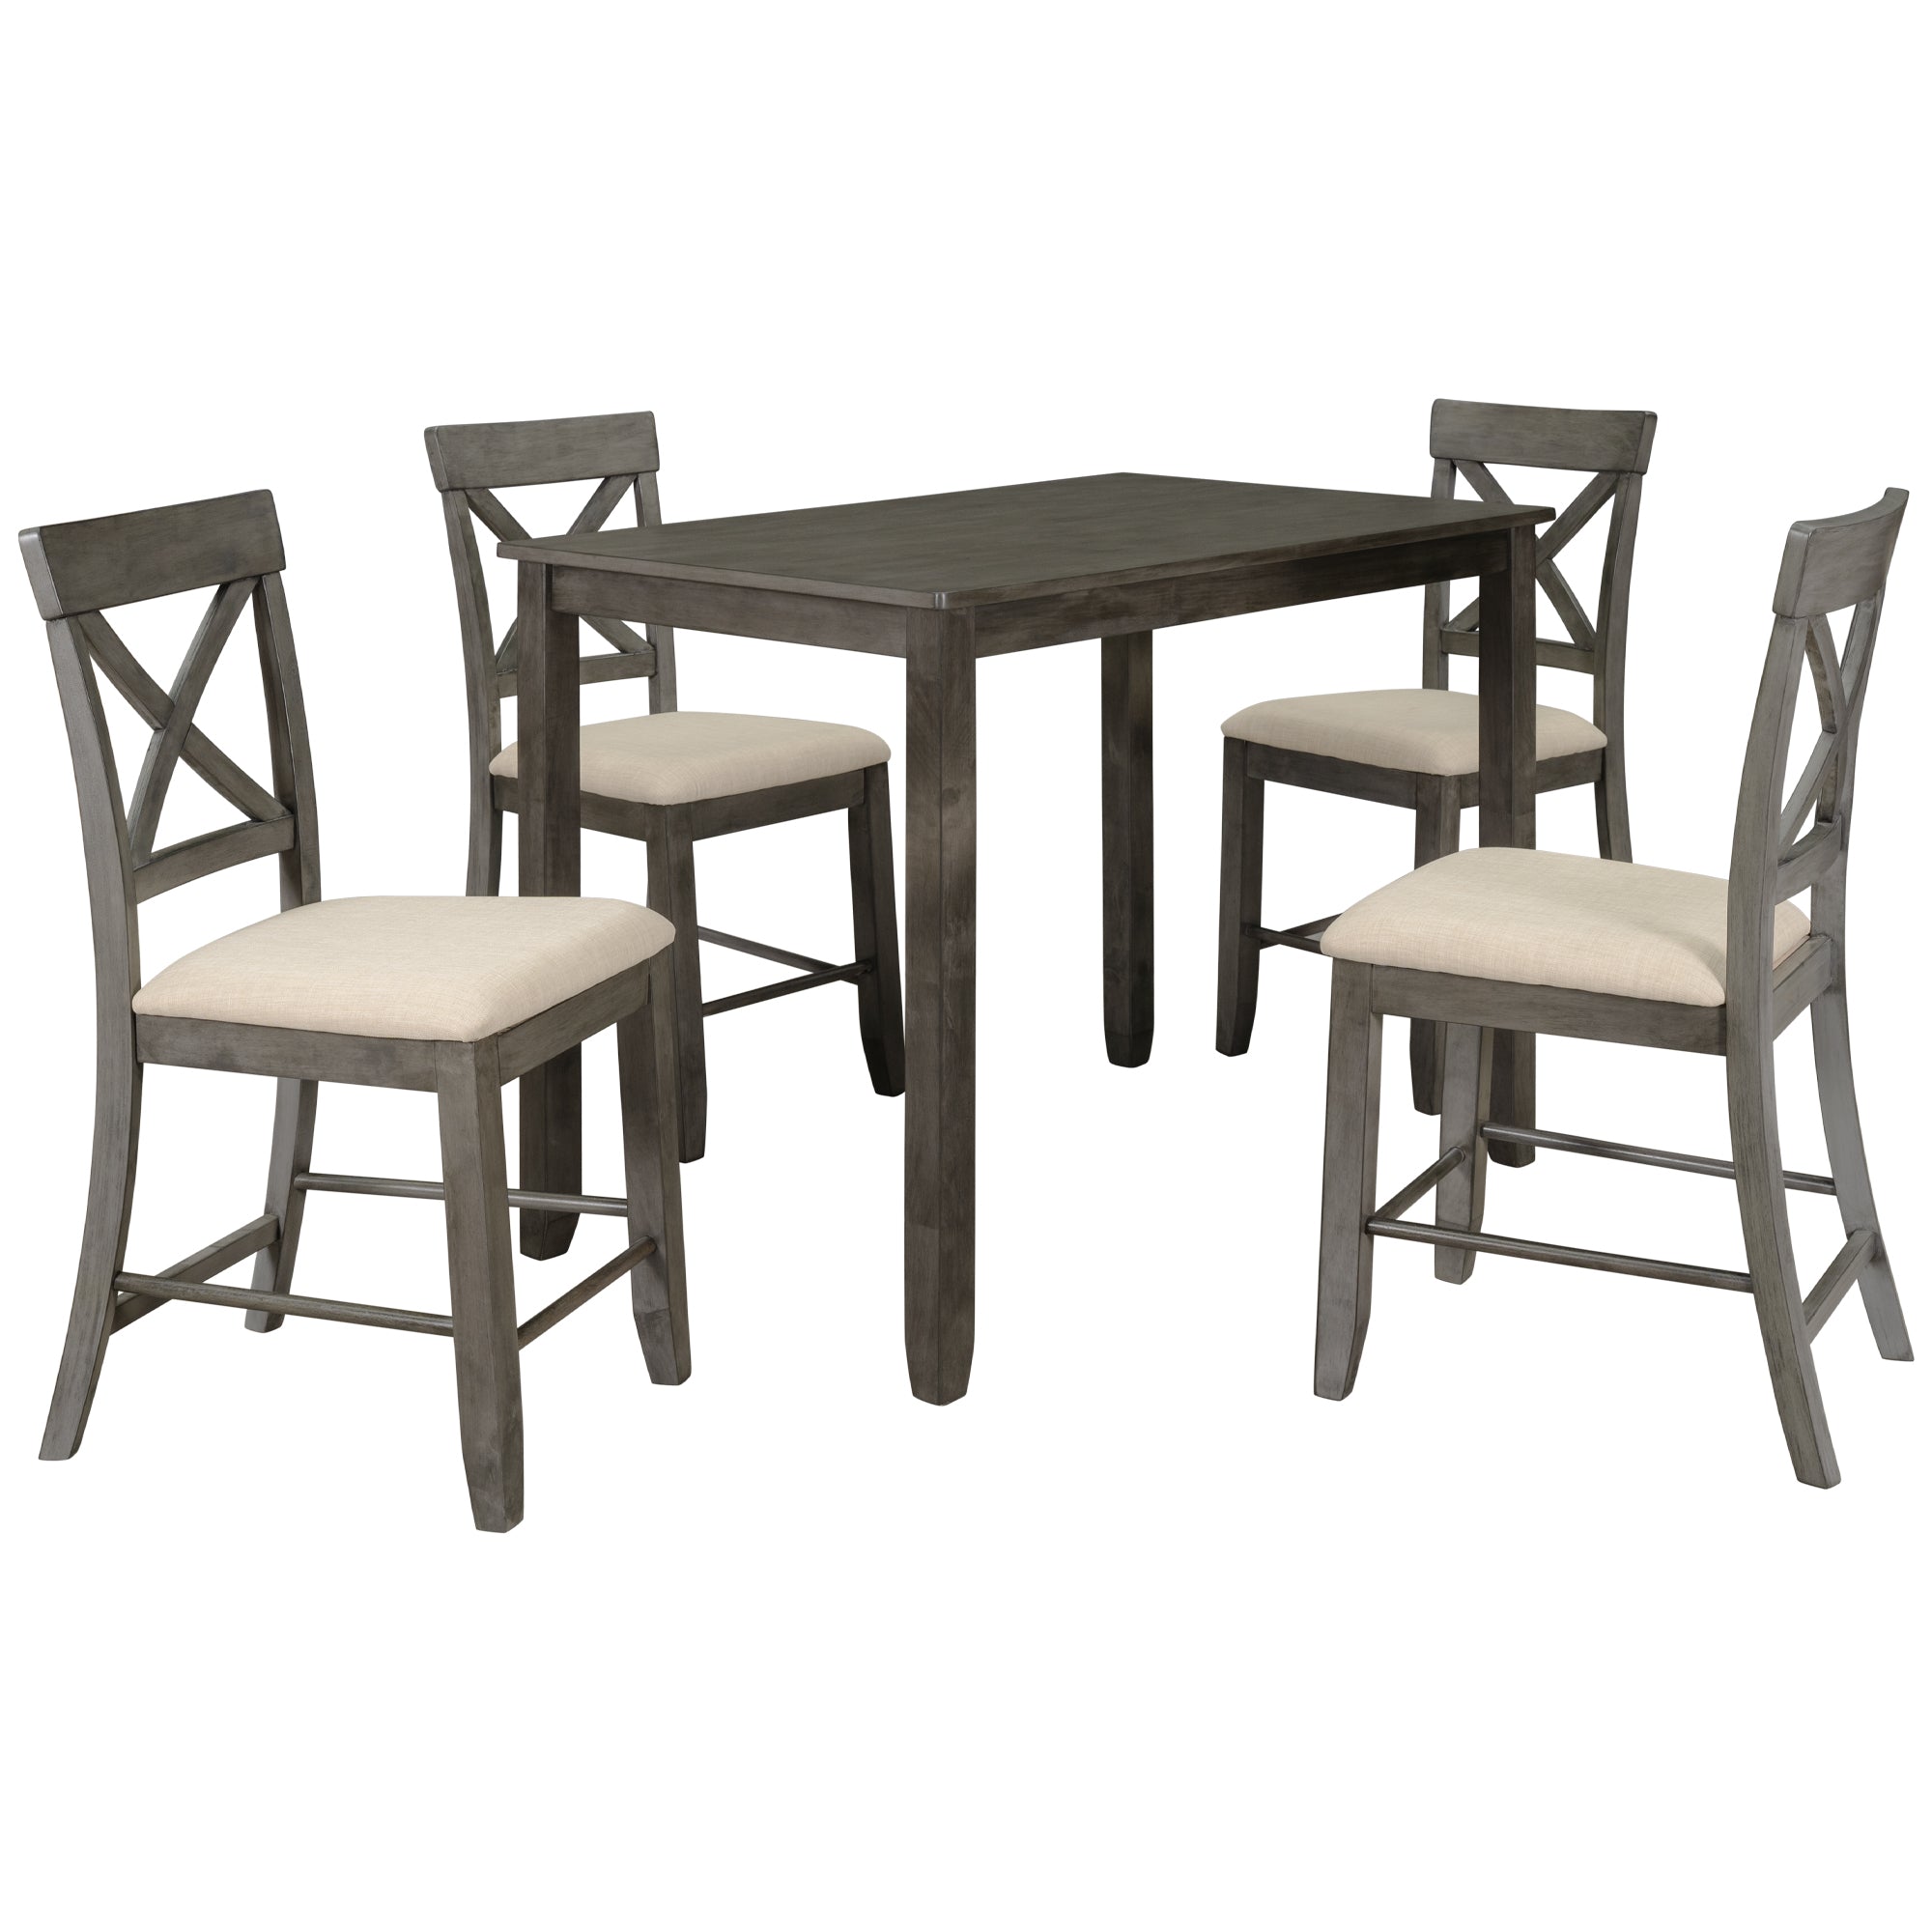 Wood 5-Piece Counter Height Dining Table Set with 4 Upholstered Chairs, Gray